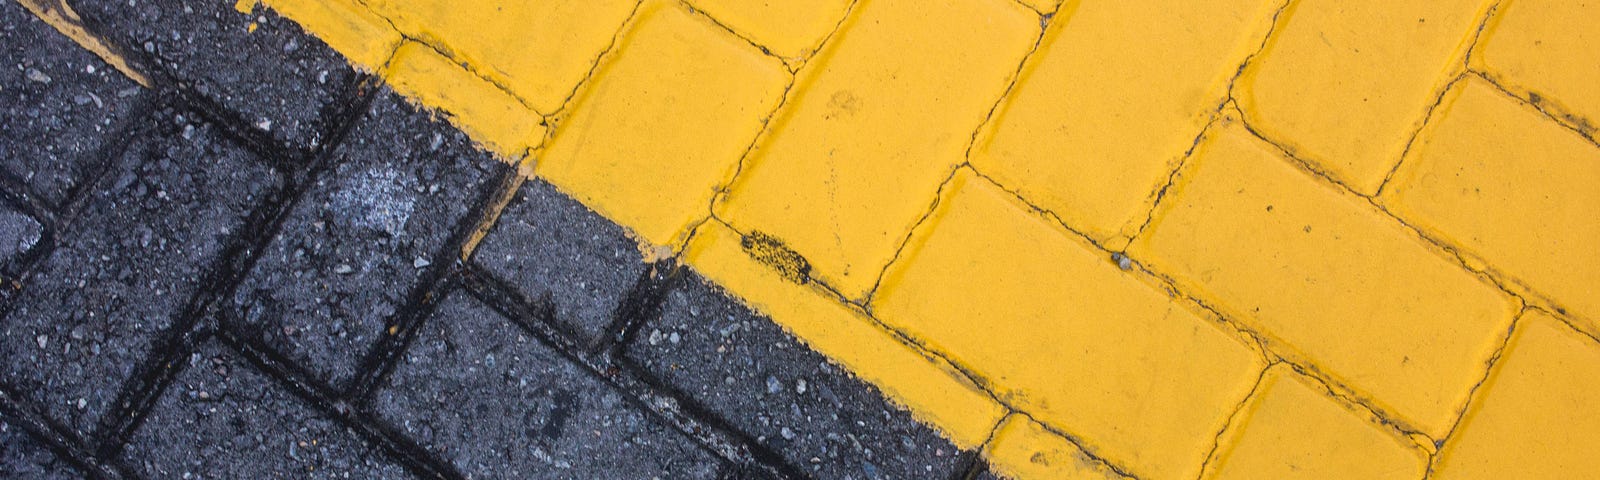 Brick road, half unpainted, half painted yellow in a diagonal composition.